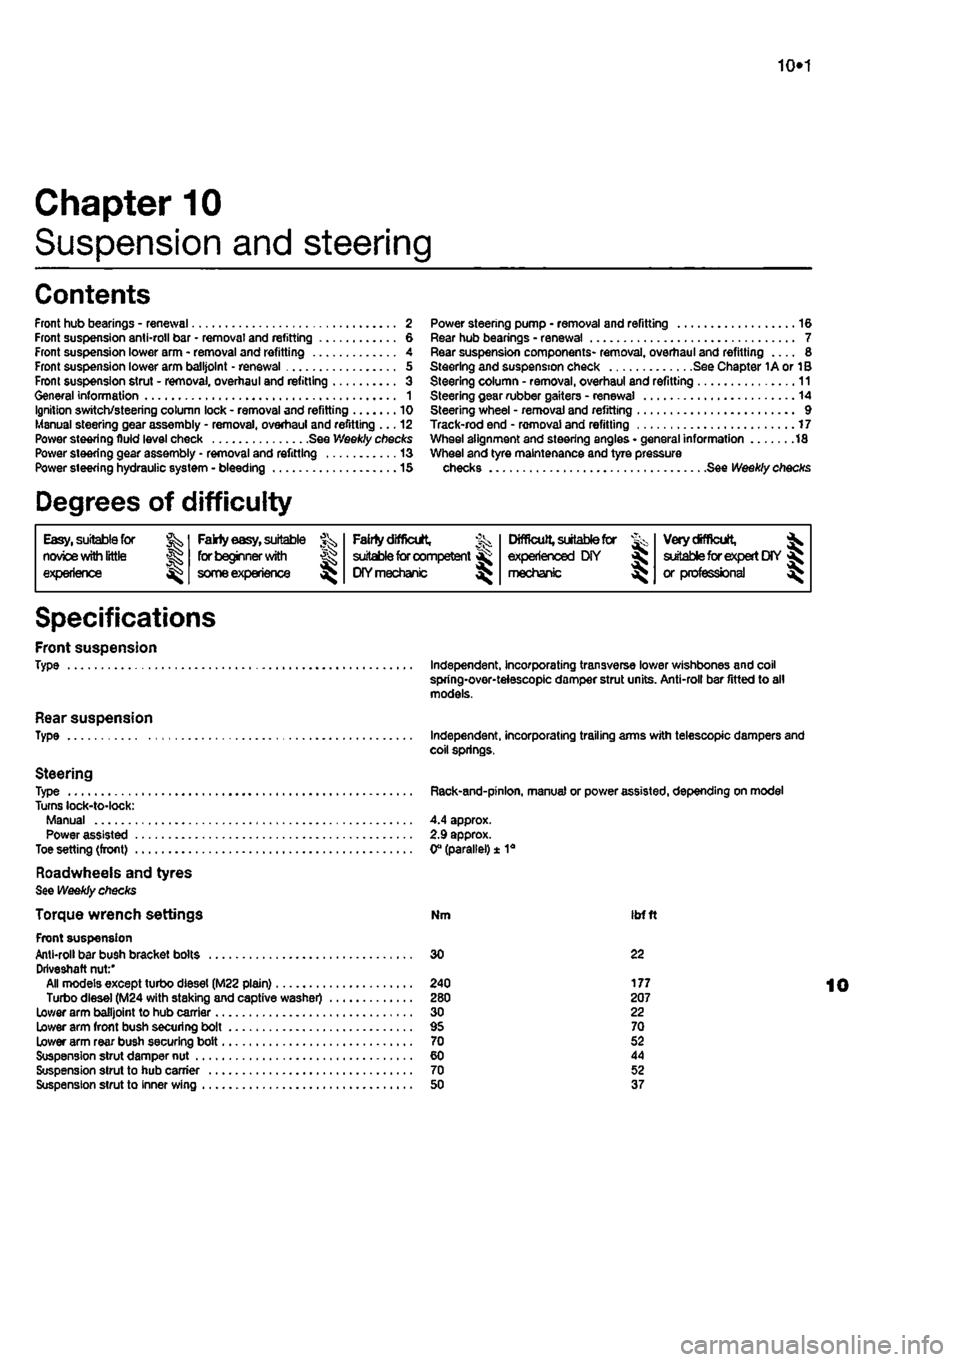 FIAT PUNTO 1994 176 / 1.G Owners Guide 
10*1 
Chapter 10 
Suspension and steering 
Contents 
Front hub bearings - renewal 2 Front suspension anti-roll bar • removal and refitting 6 Front suspension lower arm - removal and refitting 4 Fro